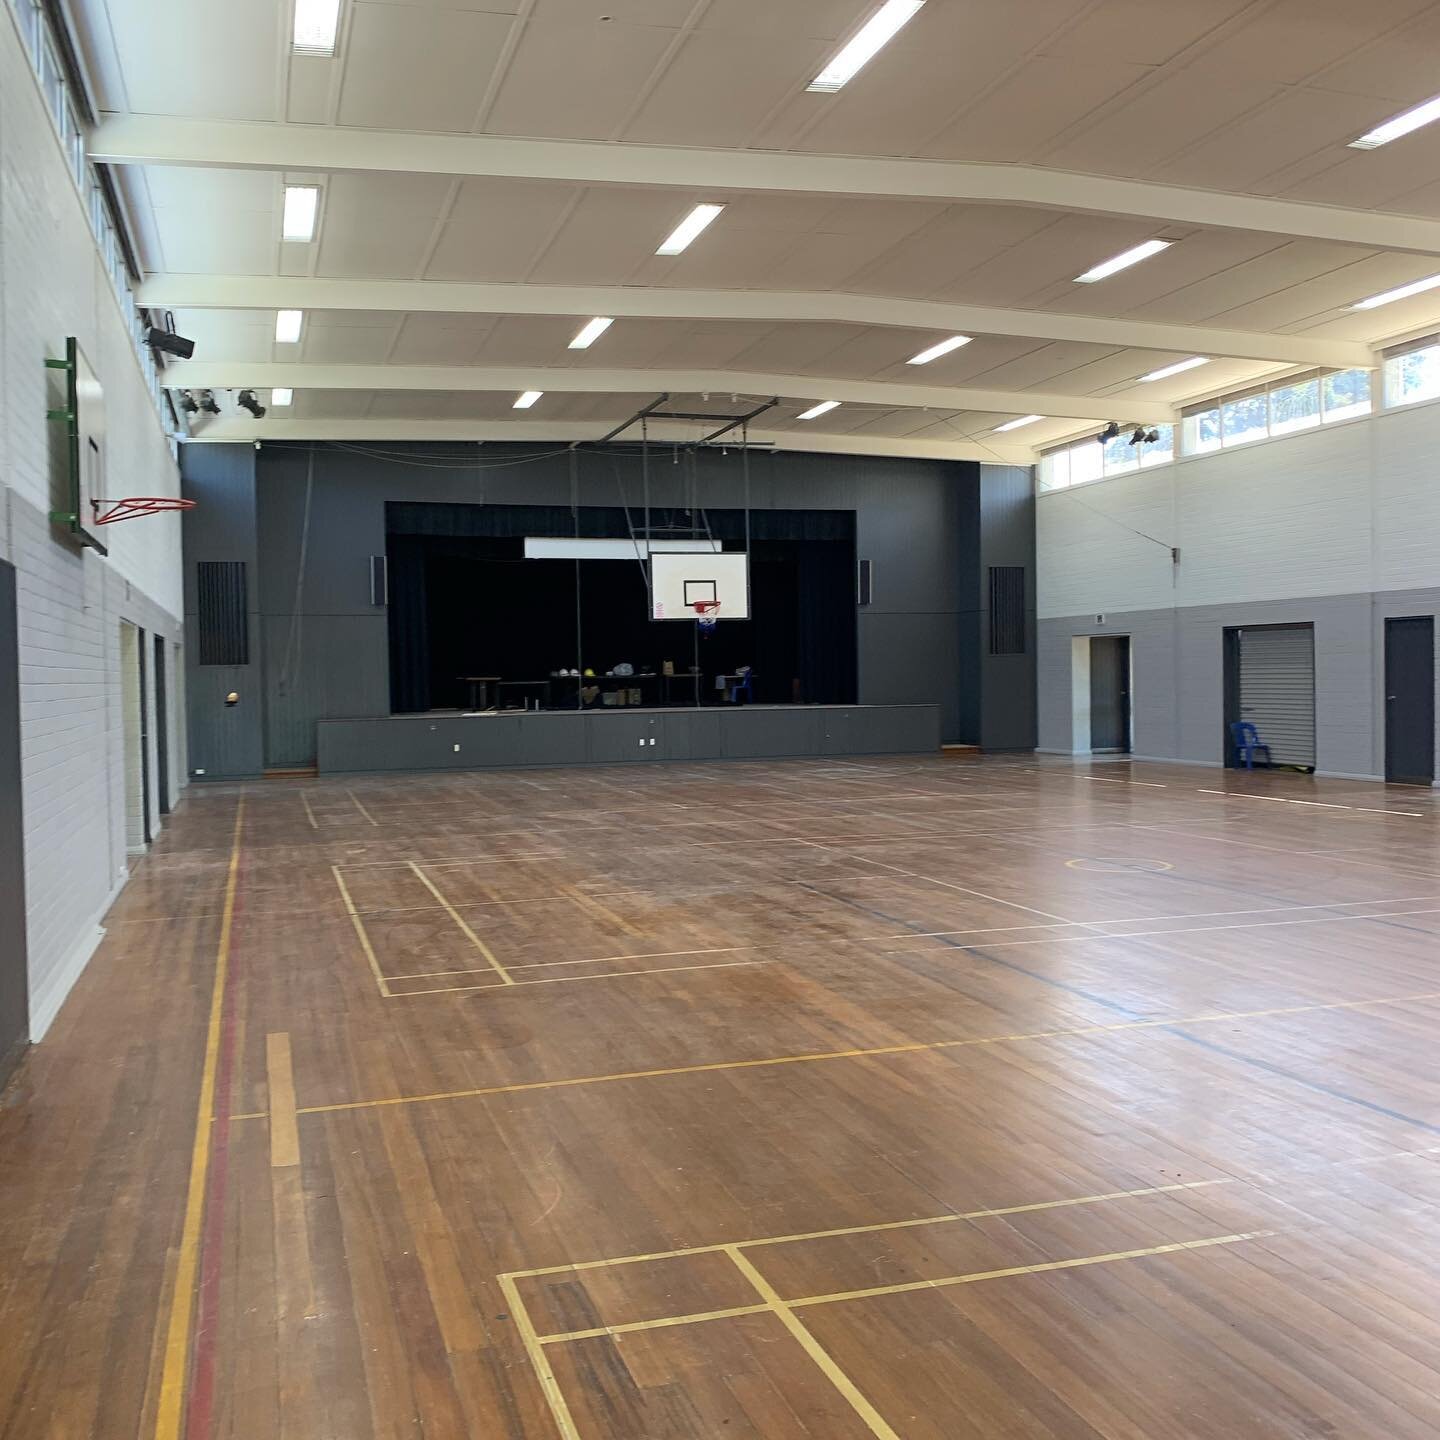 🎨 How about this for a transformation!⠀
⠀
We have recently finished up at Clairvaux Primary School, giving the Hall a brand new look with some colour and light. ⠀
⠀
Have a scroll through to see the before and afters. ⠀
⠀
■ Bare bricks given a fresh 